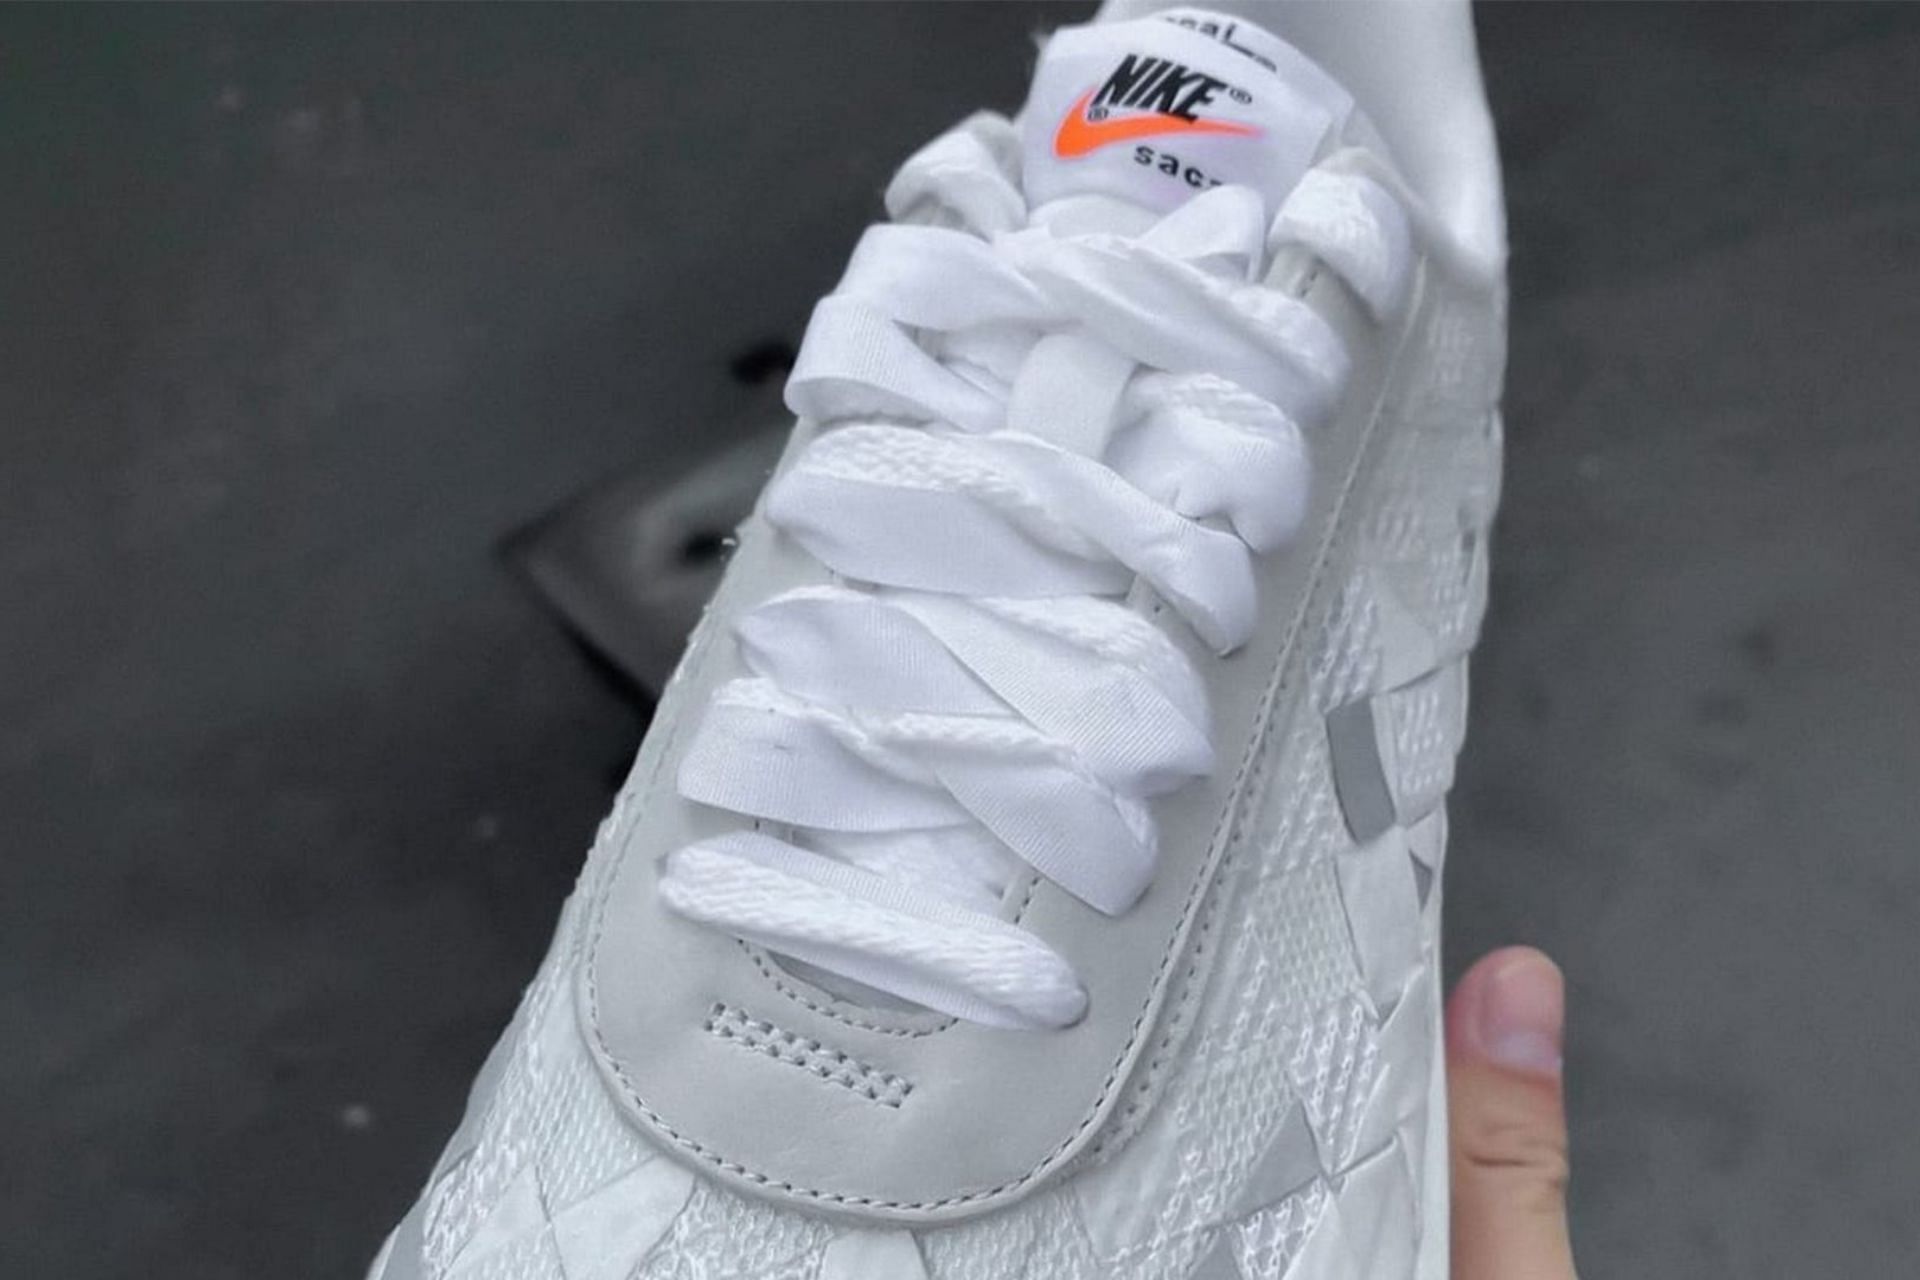 Take a closer look at the upcoming collab Nike Waffle Woven sneakers (Image via Instagram/@jfgrails)